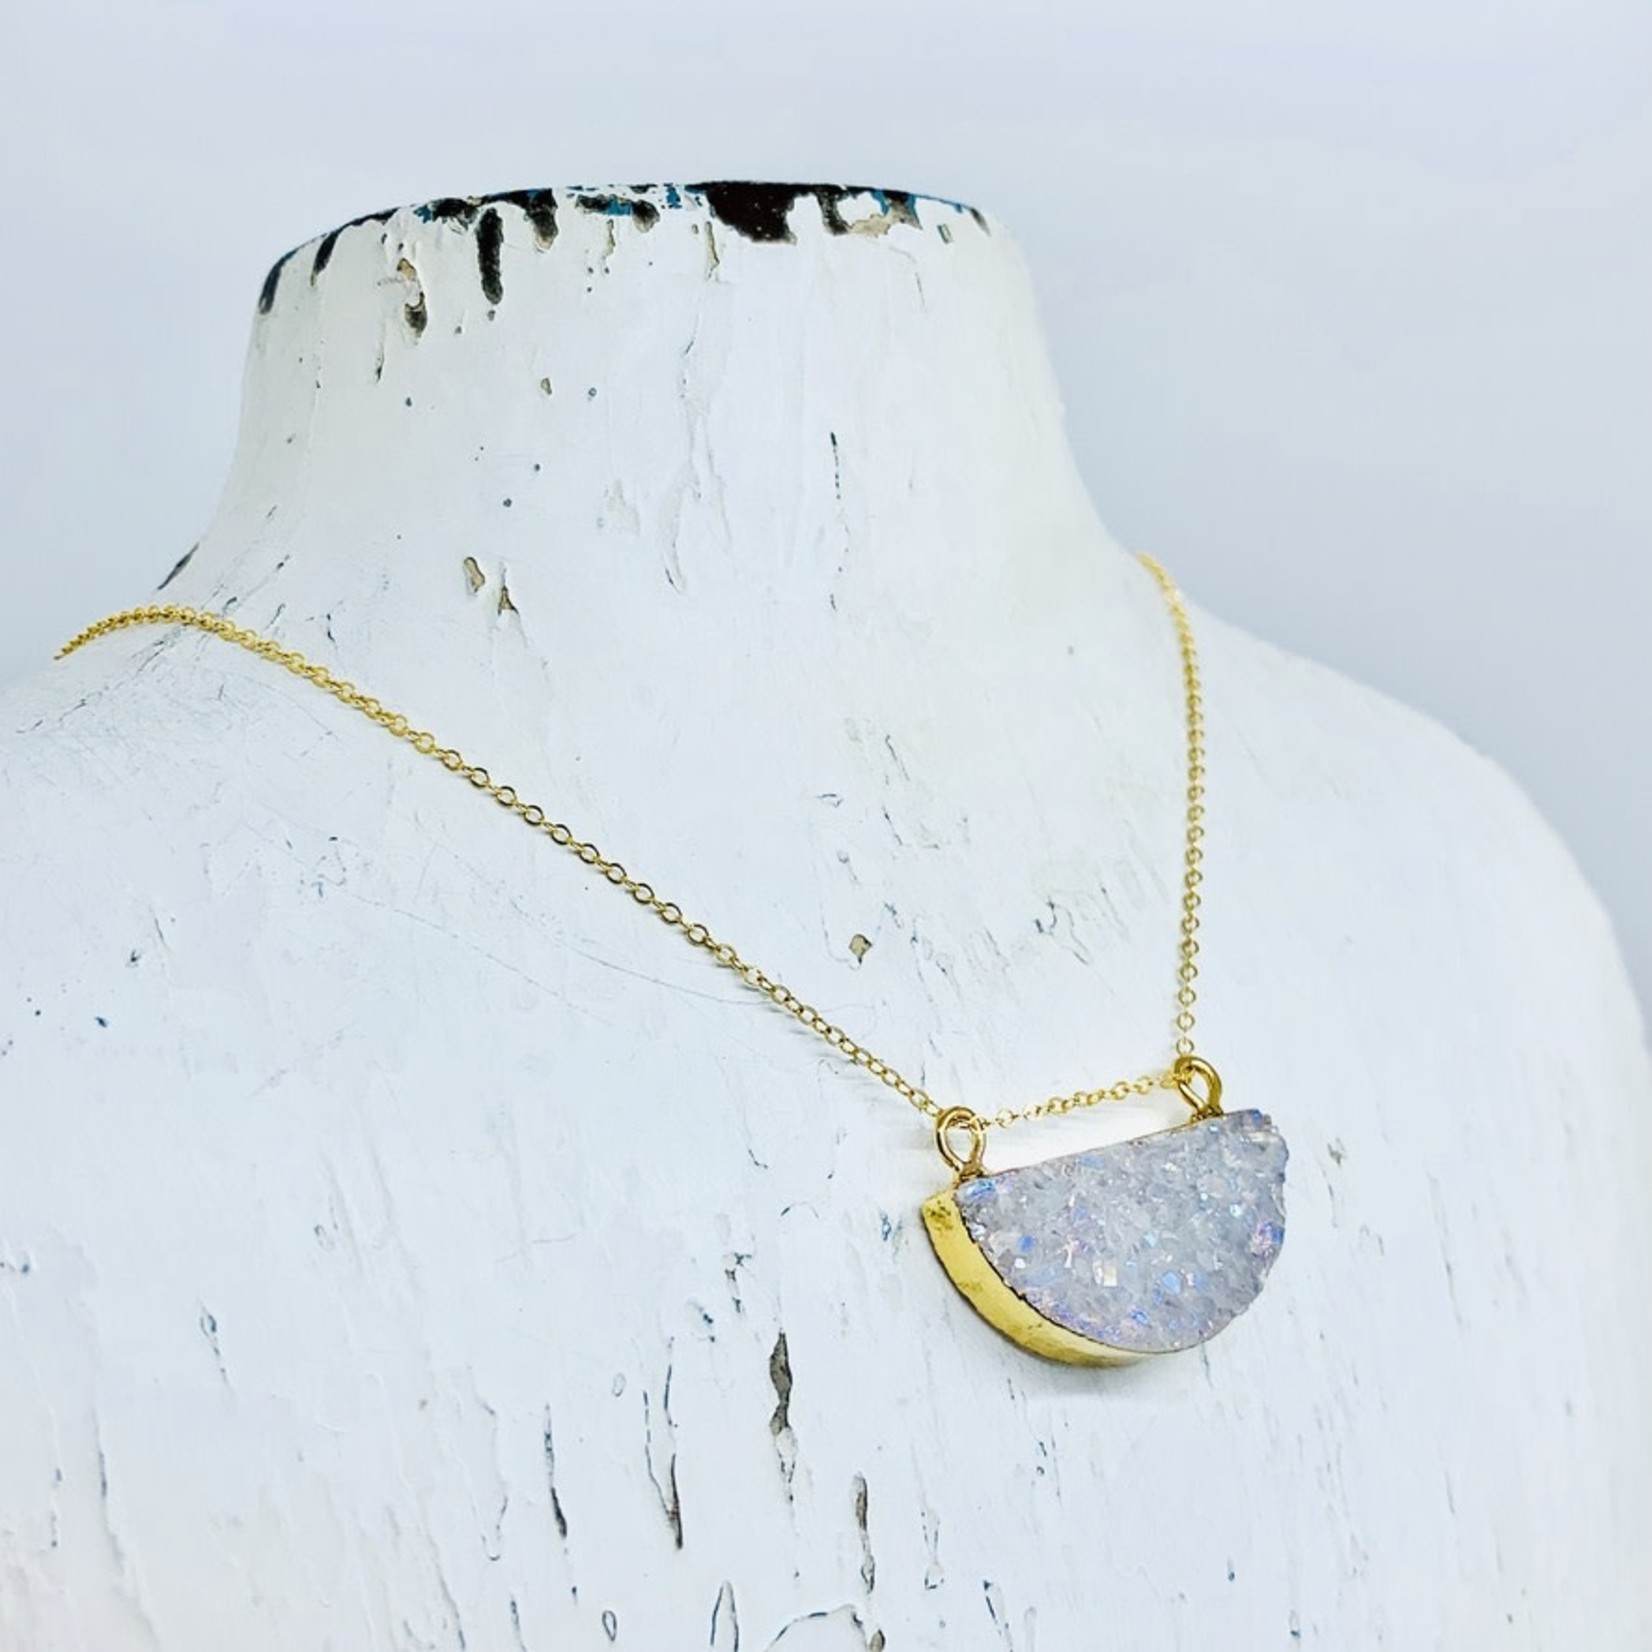 Handmade 14k Goldfill Necklace with White Half Moon Druzy